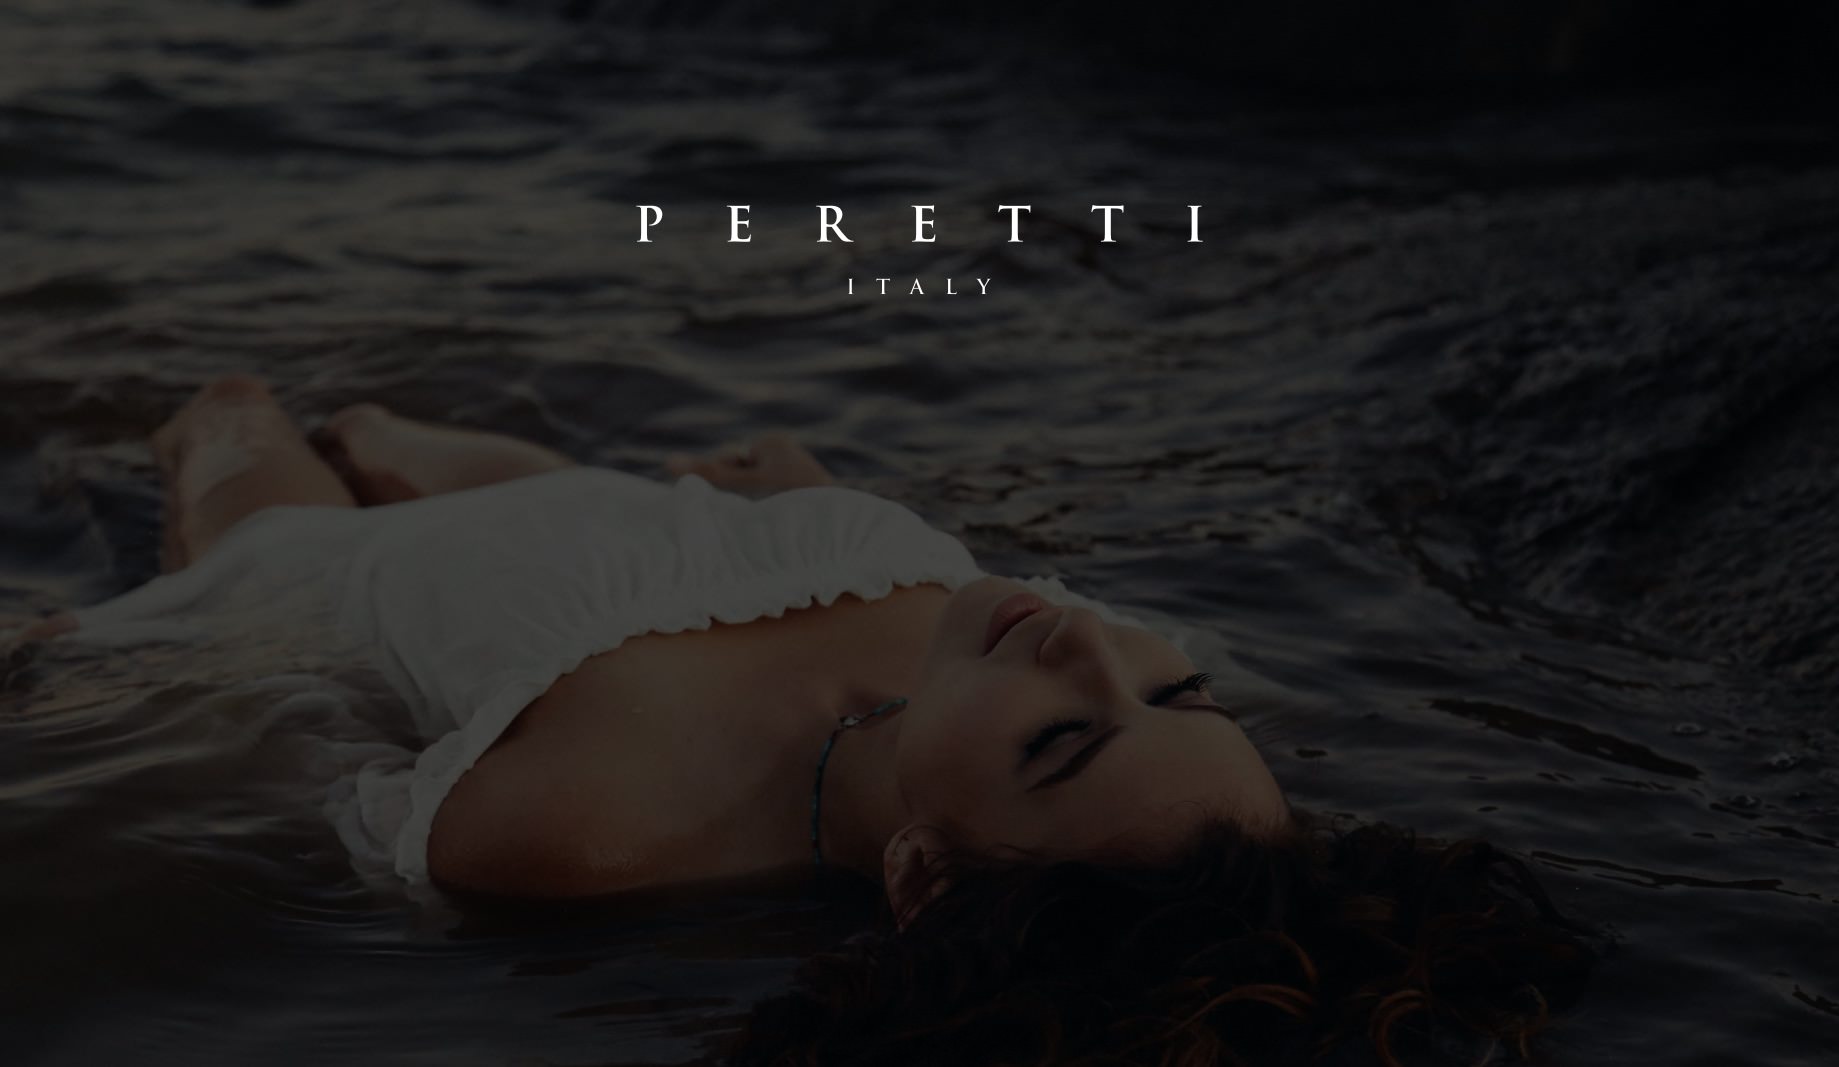 IU White Peretti Italy title on dimmed background of woman in a white dress laying in the water